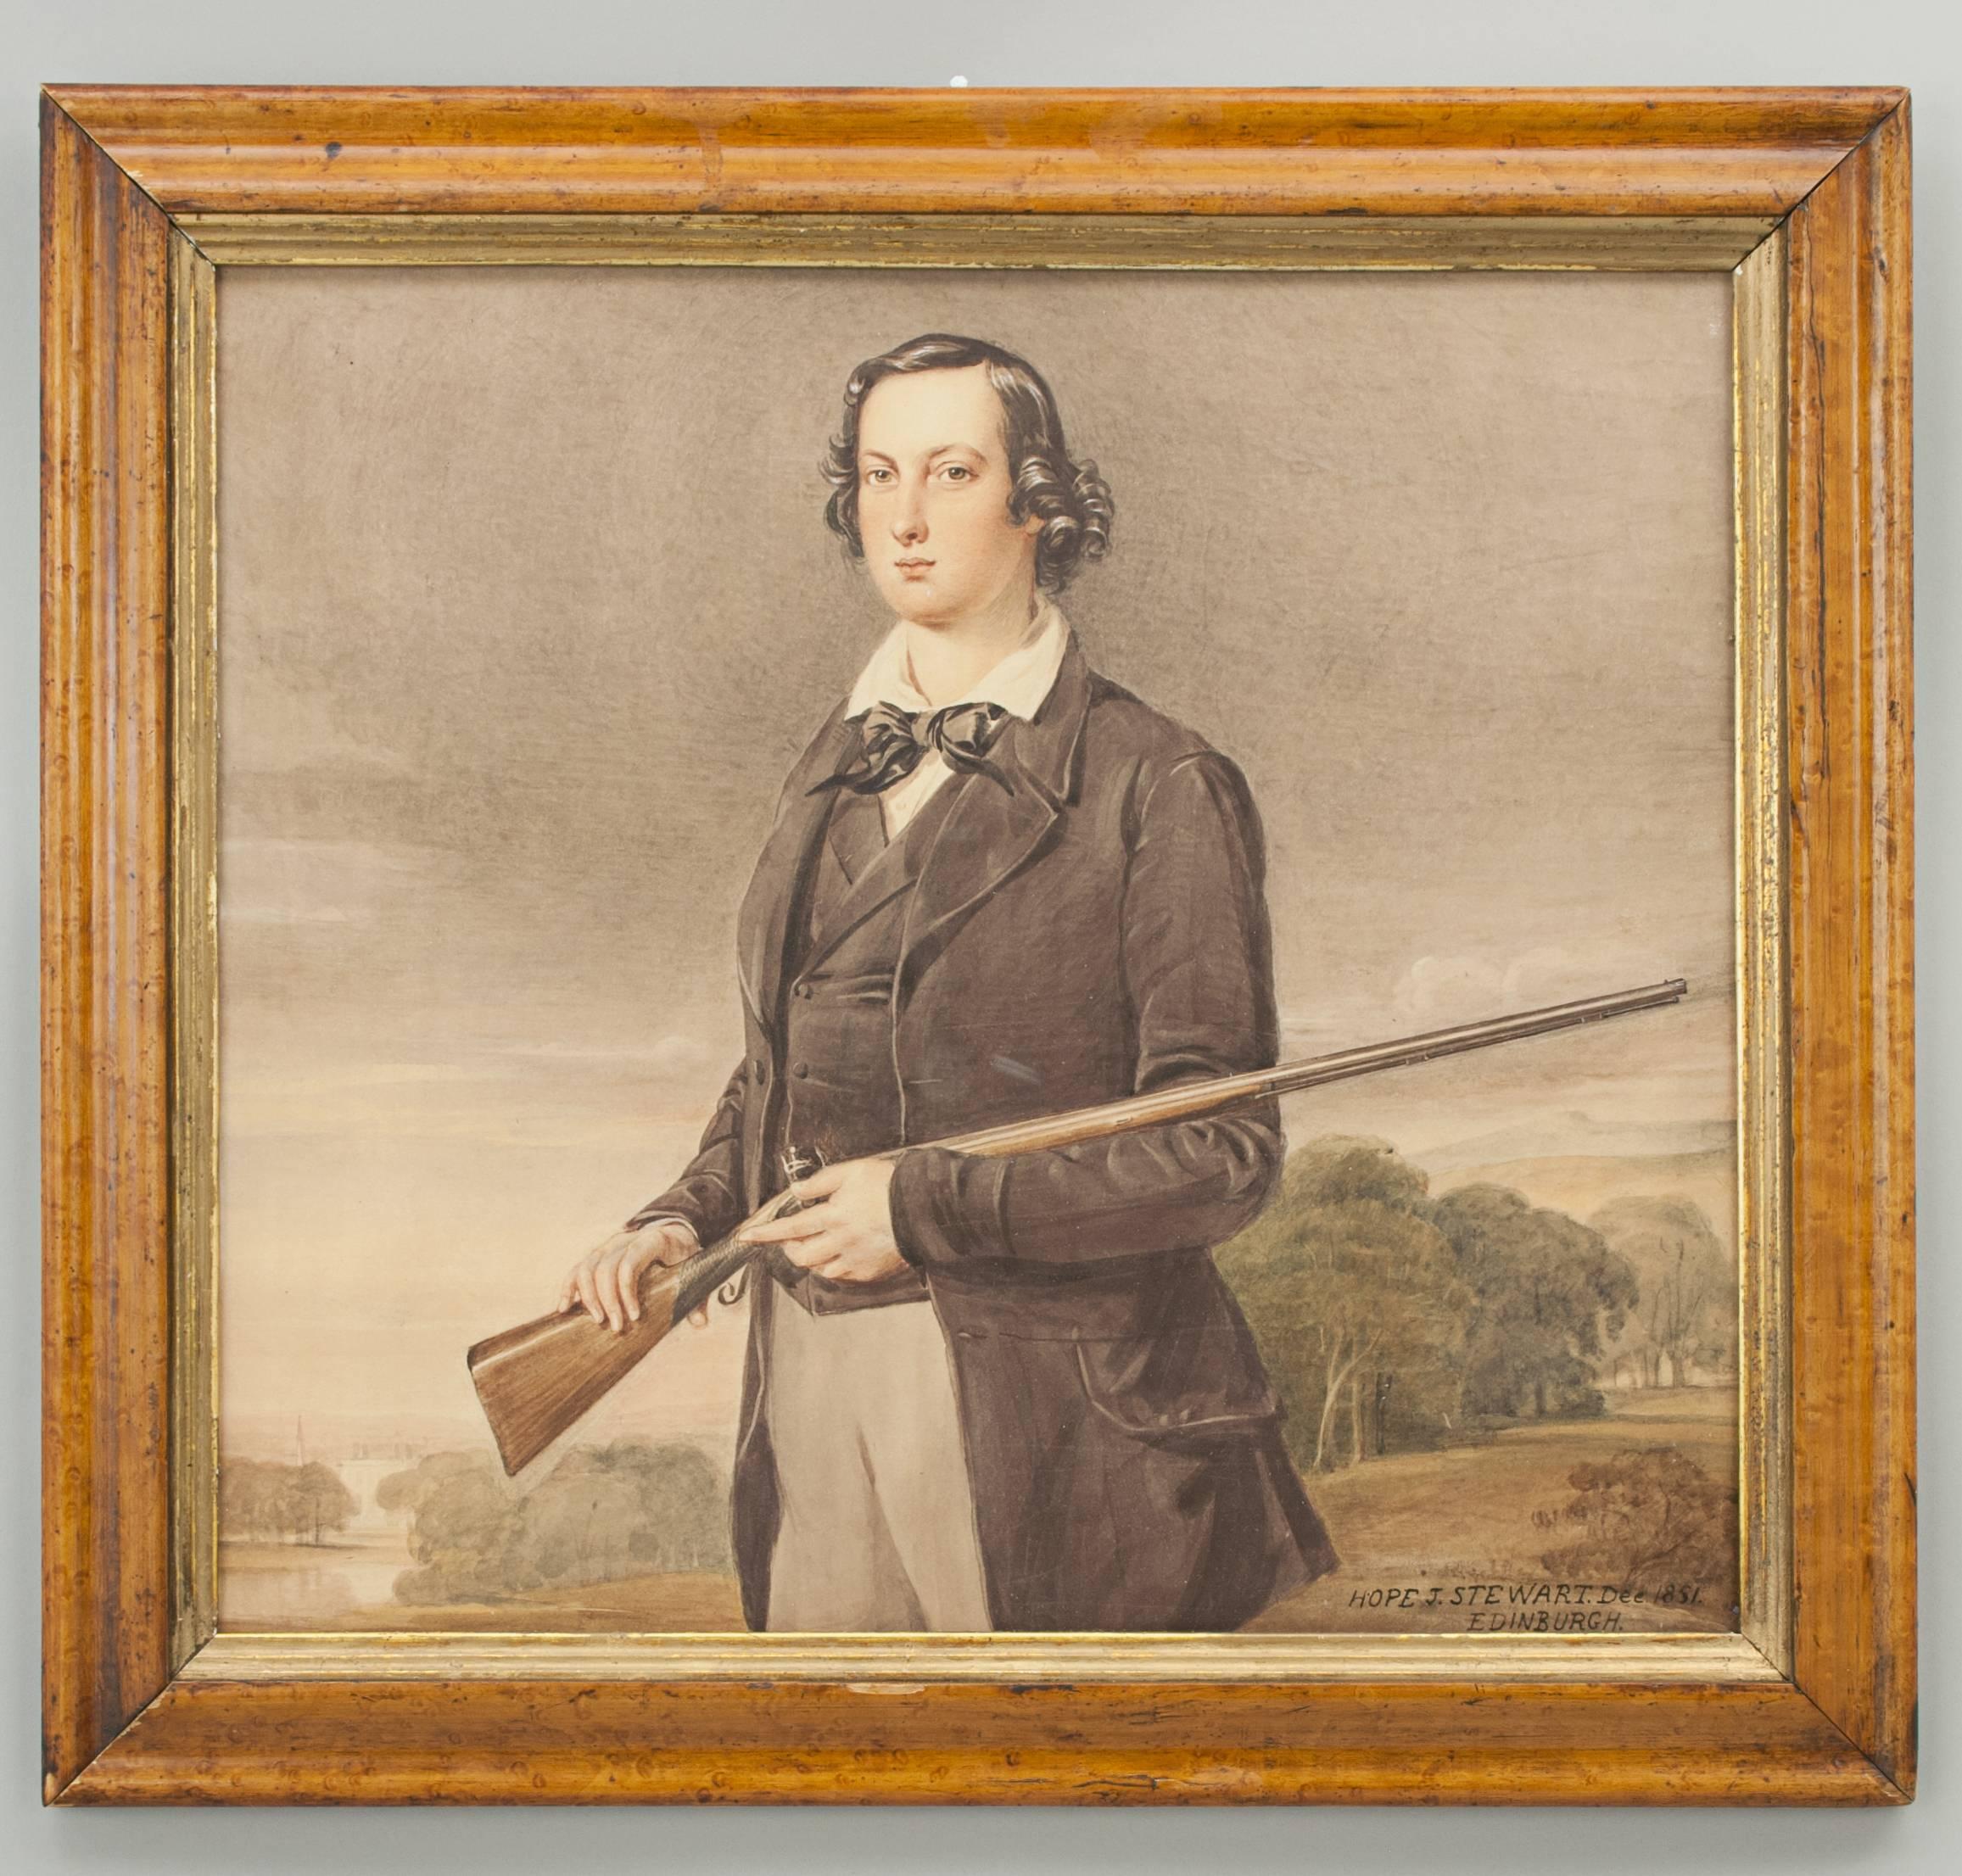 A portrait of a young man posing and holding a flintlock rifle in his arms. The water colour is in an old maple frame with gold slip and glazed. The portrait of the young man holding his sporting gun is signed and dated 'Hope J. Stewart. Dec. 1851.